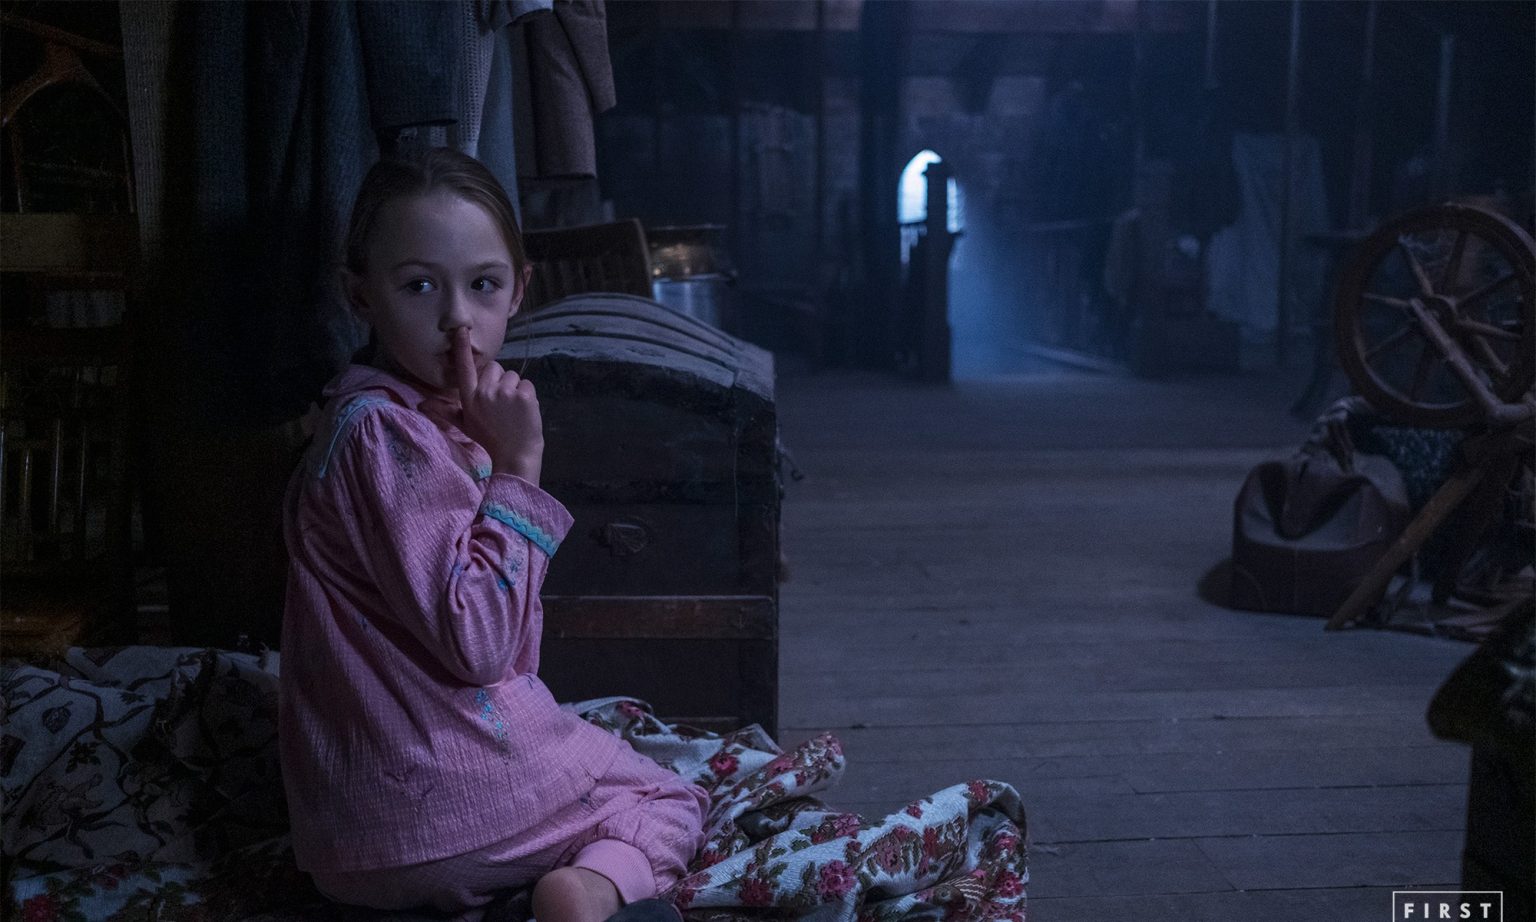 The First Trailer For 'The Haunting Of Bly Manor' Has Dropped And It